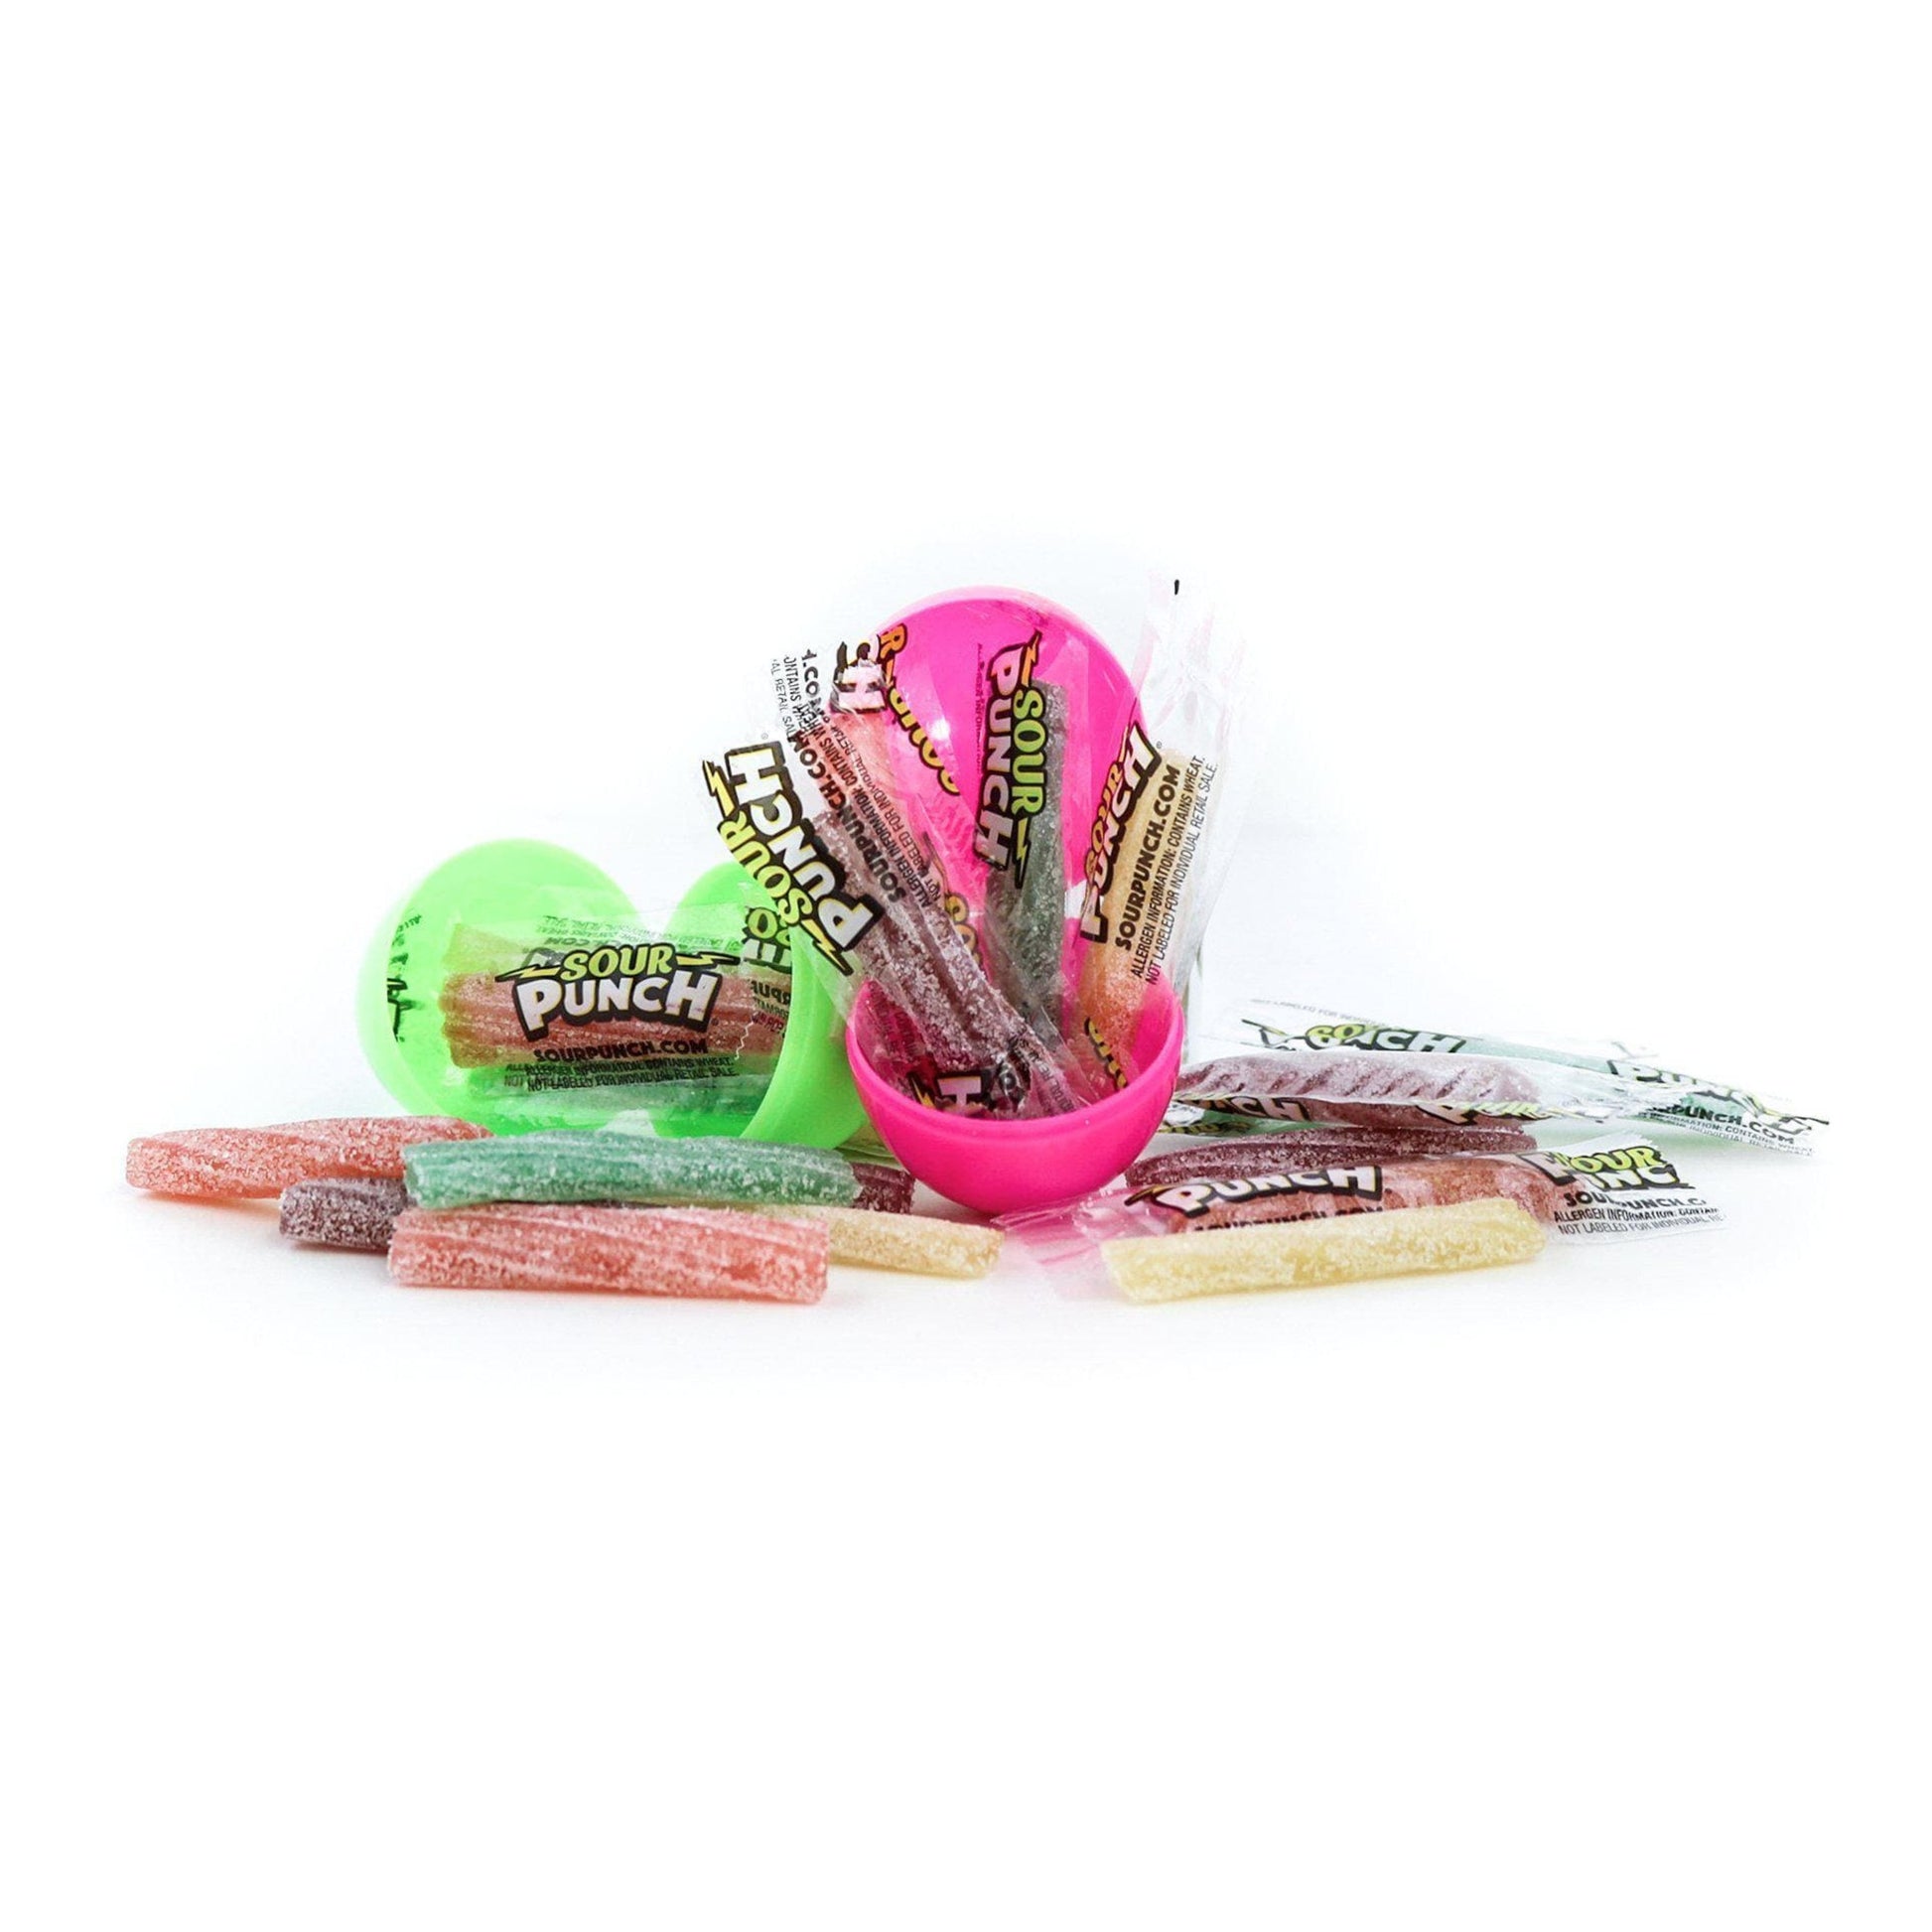 SOUR PUNCH Easter Candy Twists in plastic Easter eggs